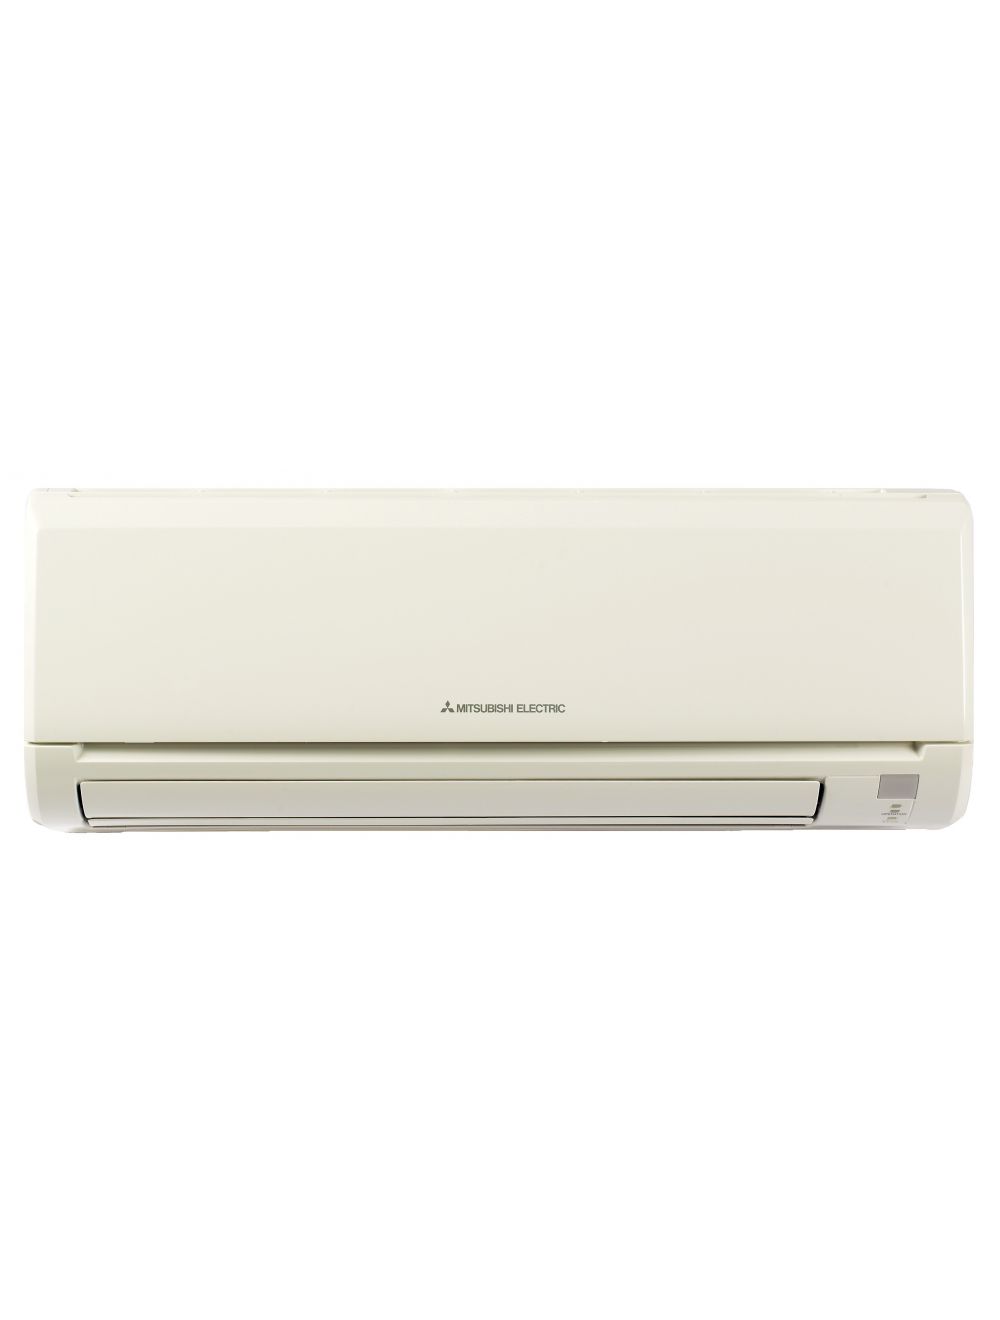 Mitsubishi MSZ-GS Series Mini Split Ductless Wall-Mounted Indoor Unit